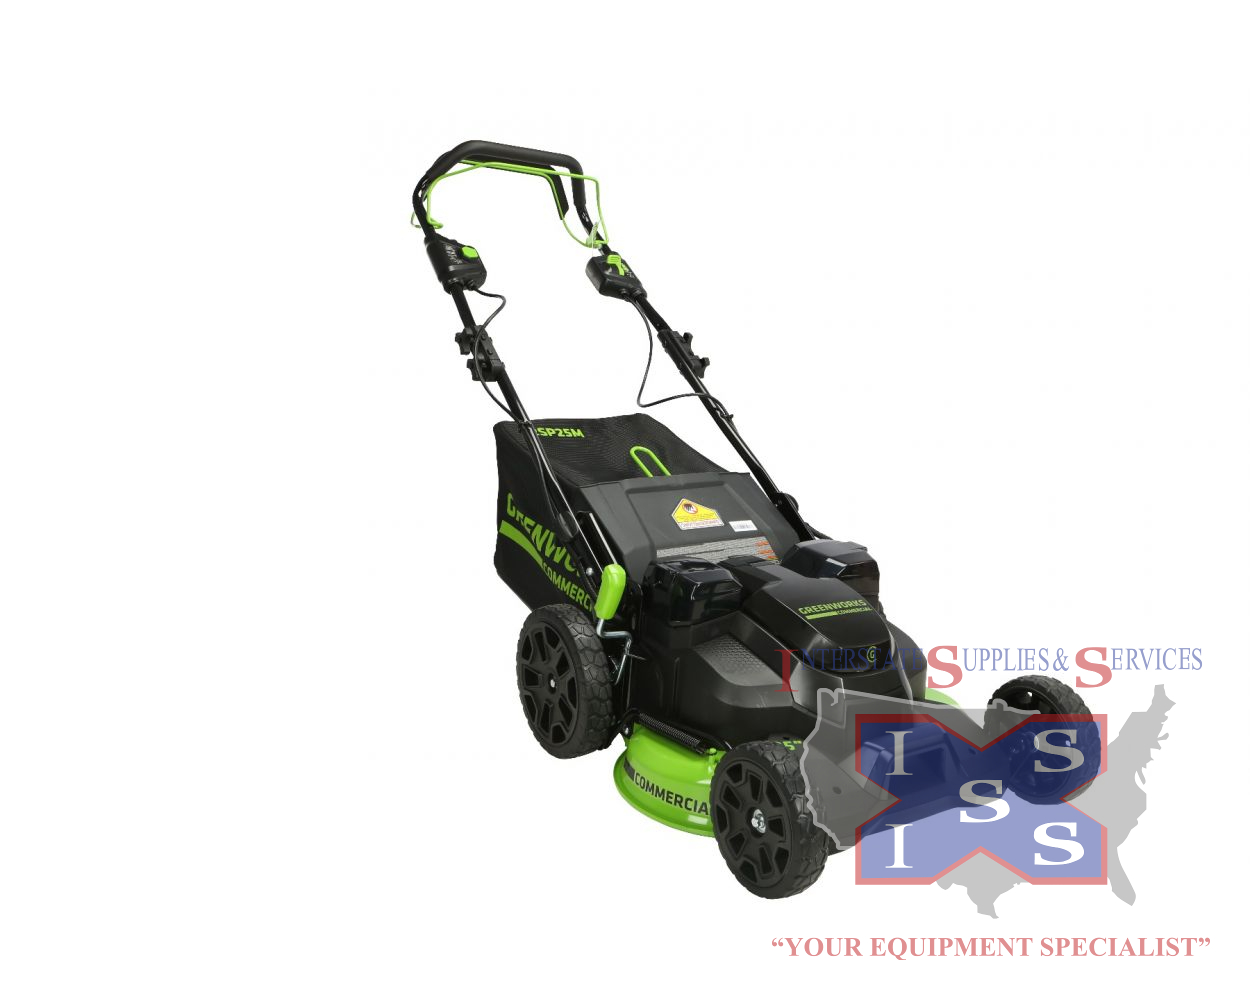 82LM25S 82-Volt 25" Self-Propelled Lawn Mower (Tool Only) - Click Image to Close